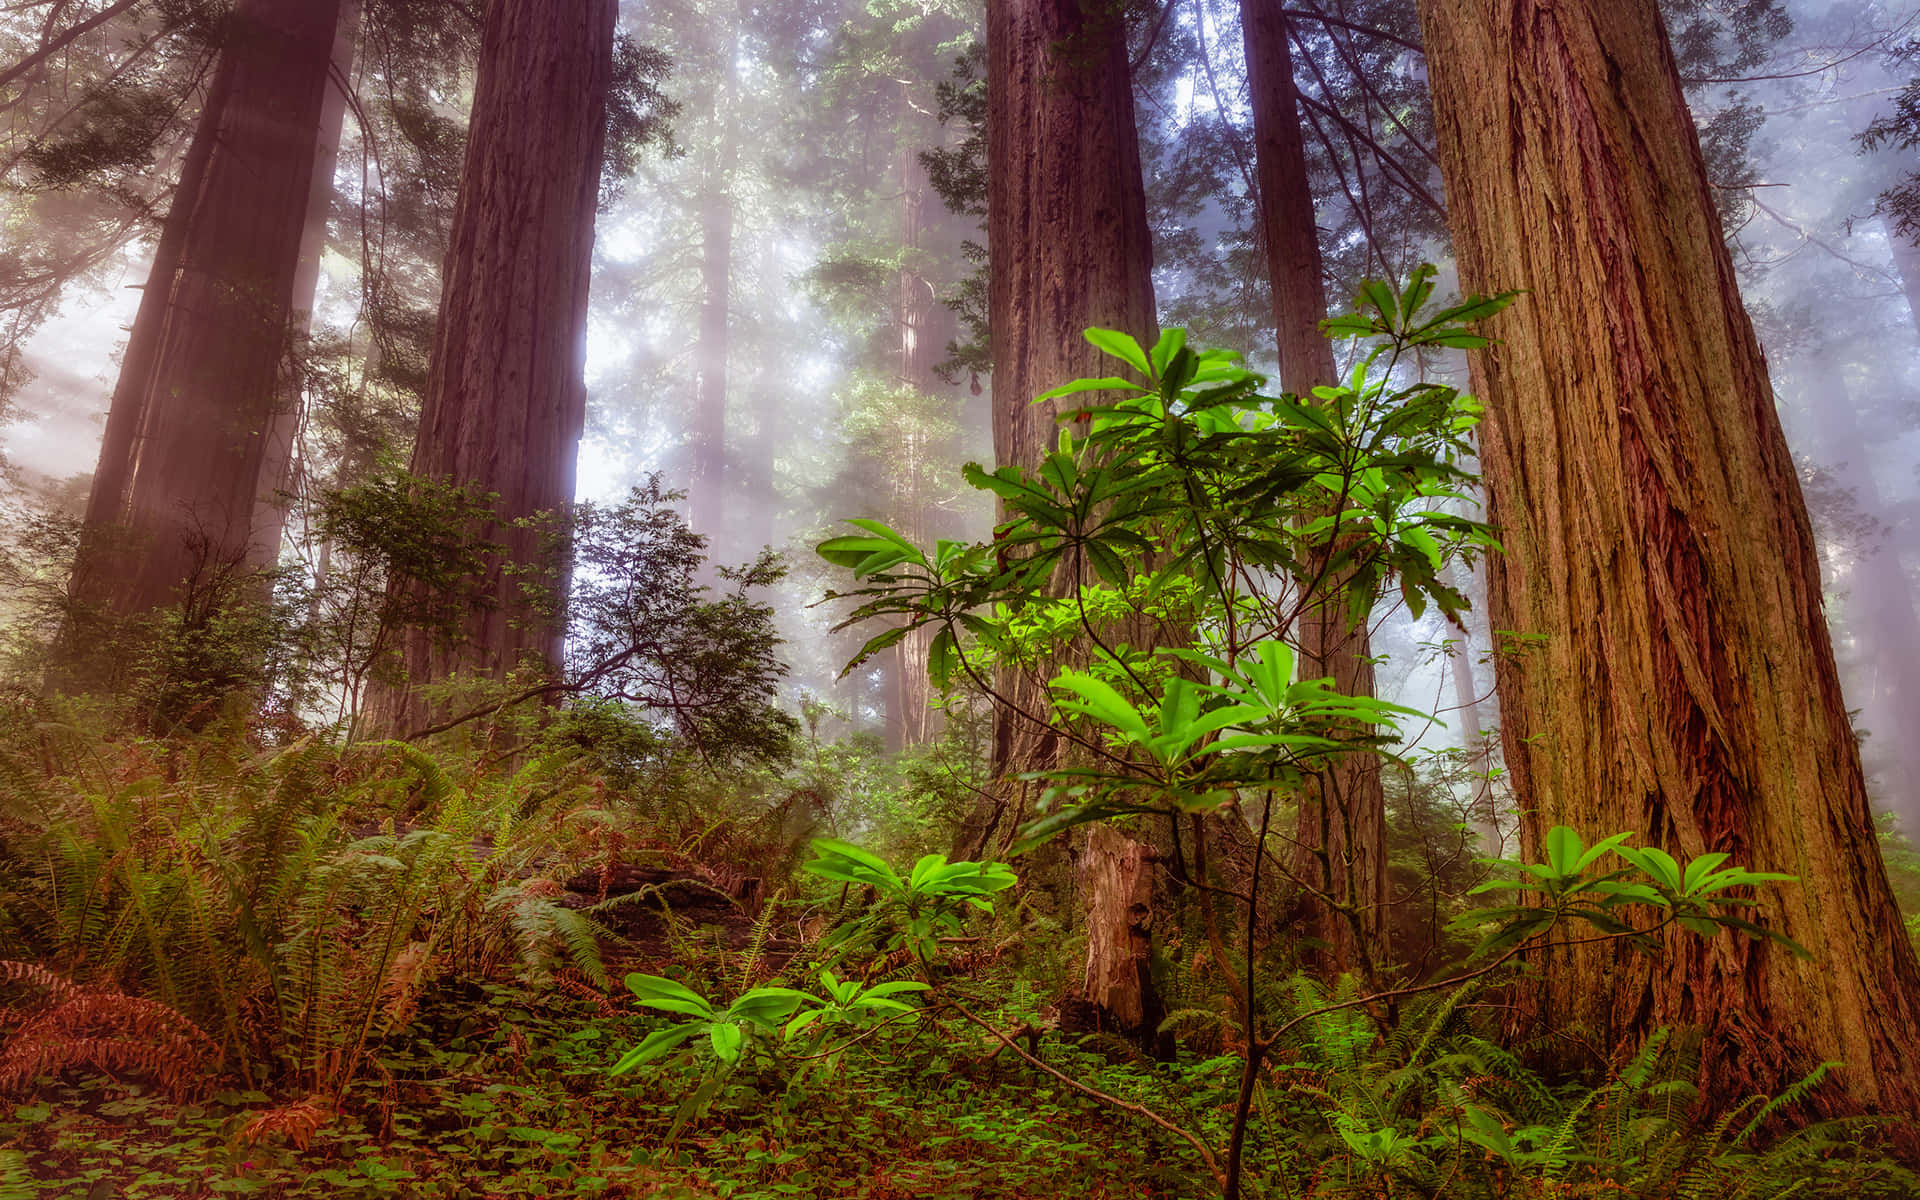 Majestic Redwood Trees in a National Park